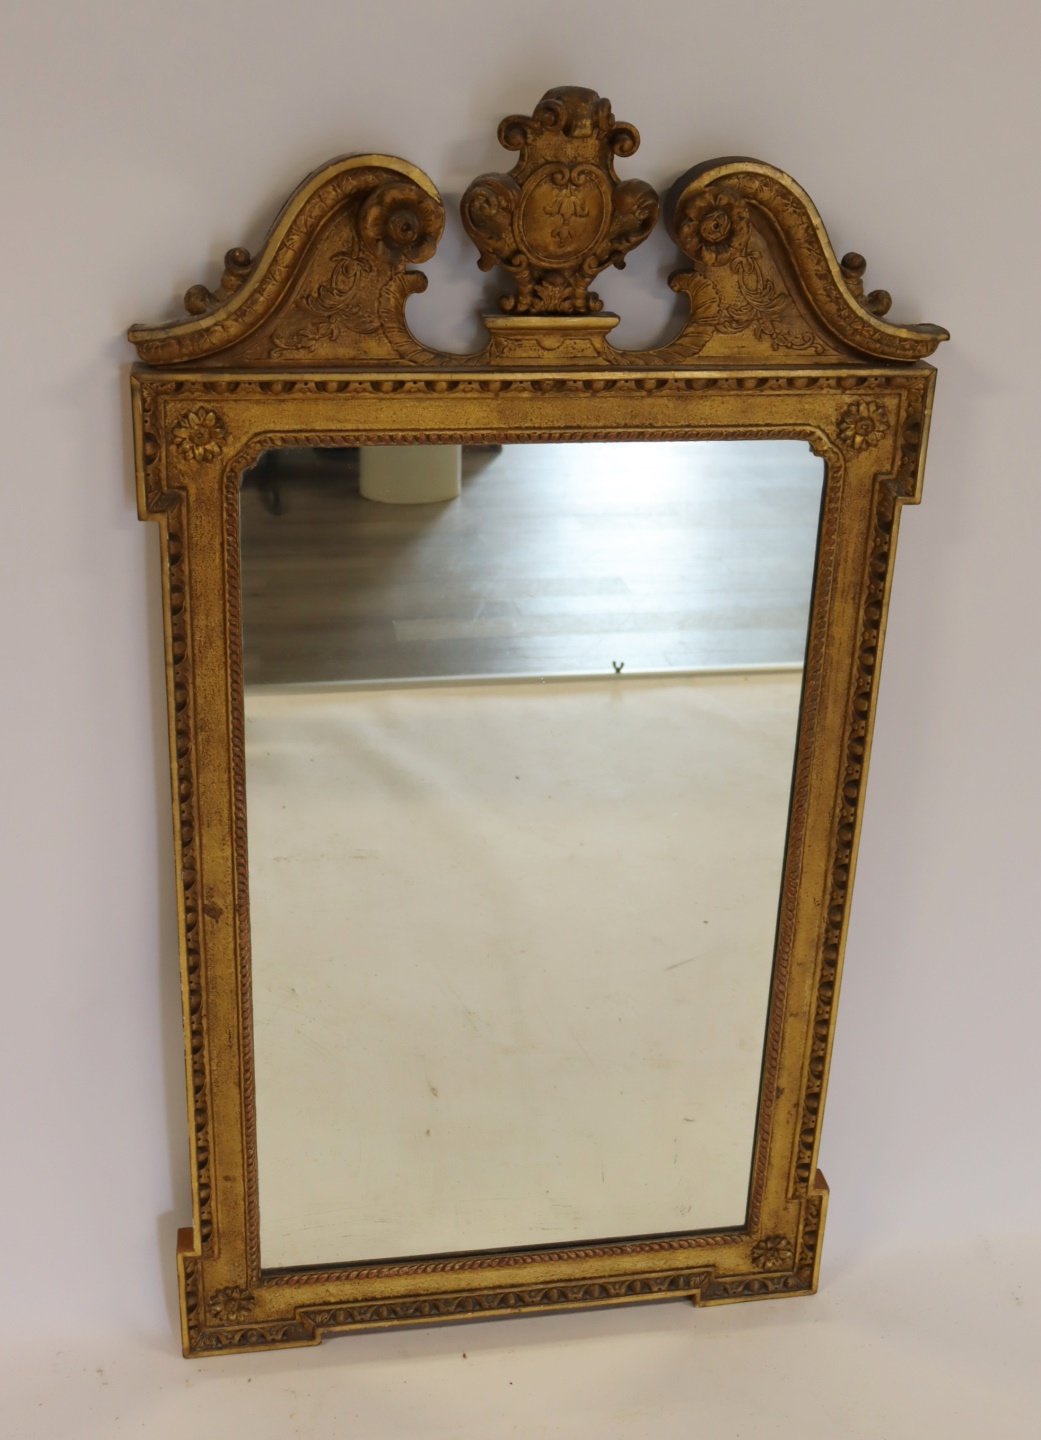 ANTIQUE CARVED GILTWOOD MIRROR 30b81a